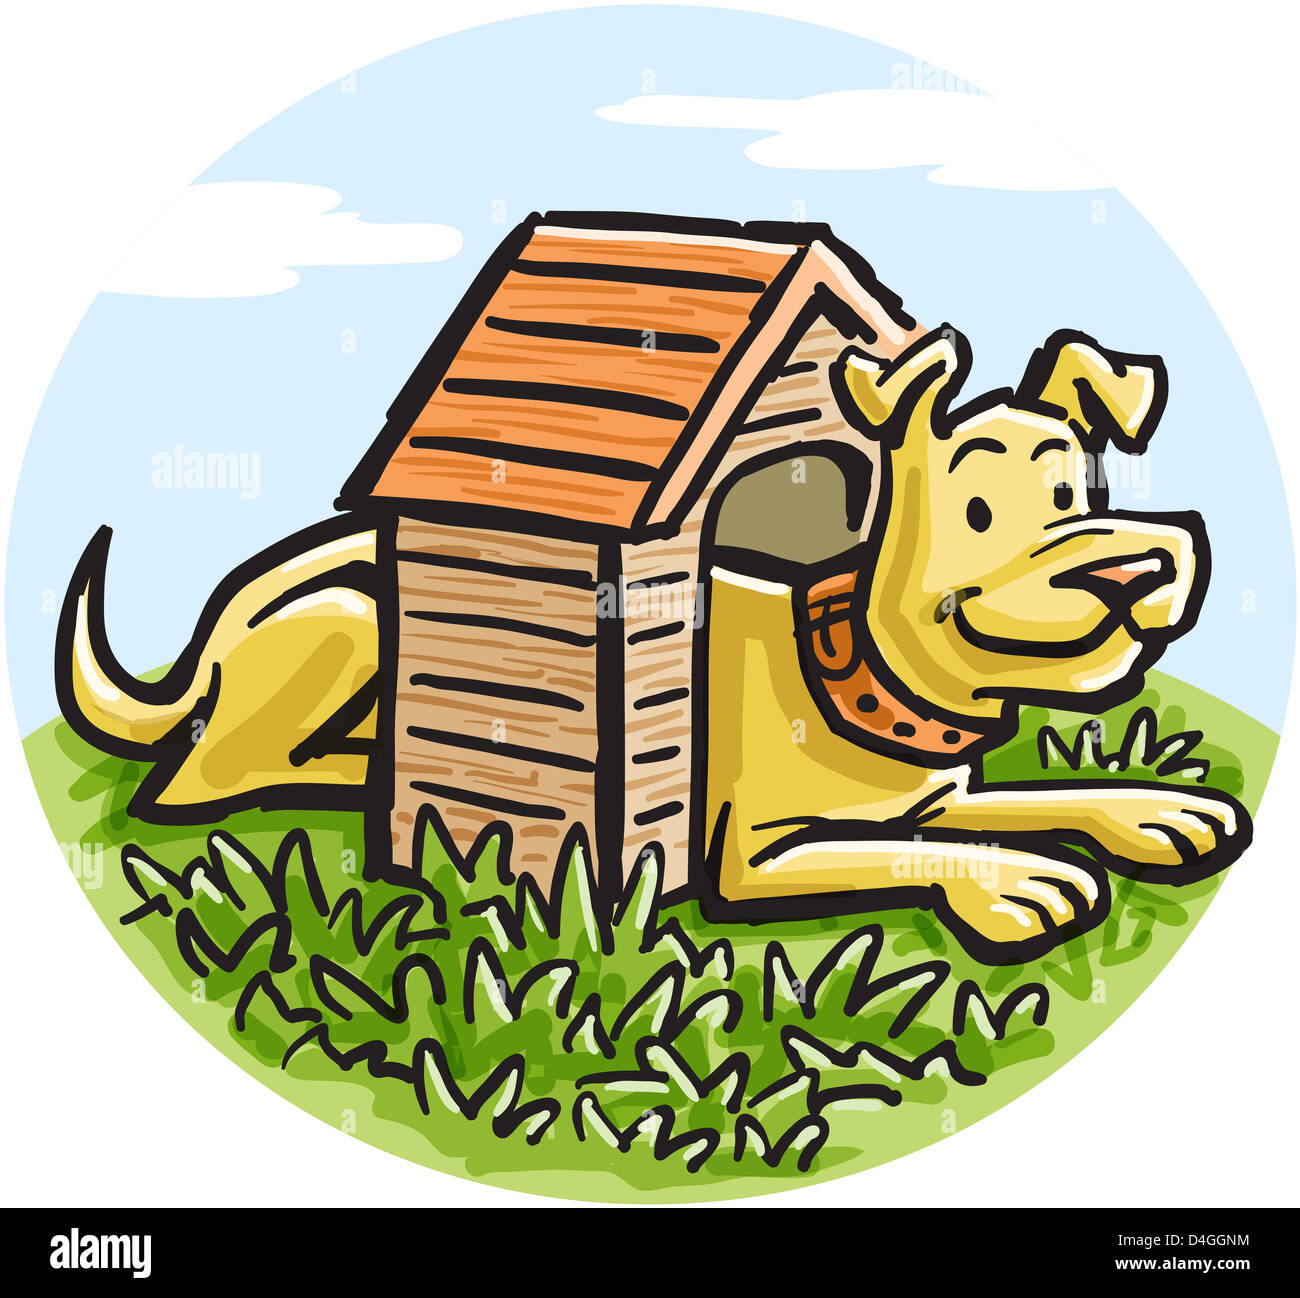 A big dog in a small dog house Stock Photo - Alamy